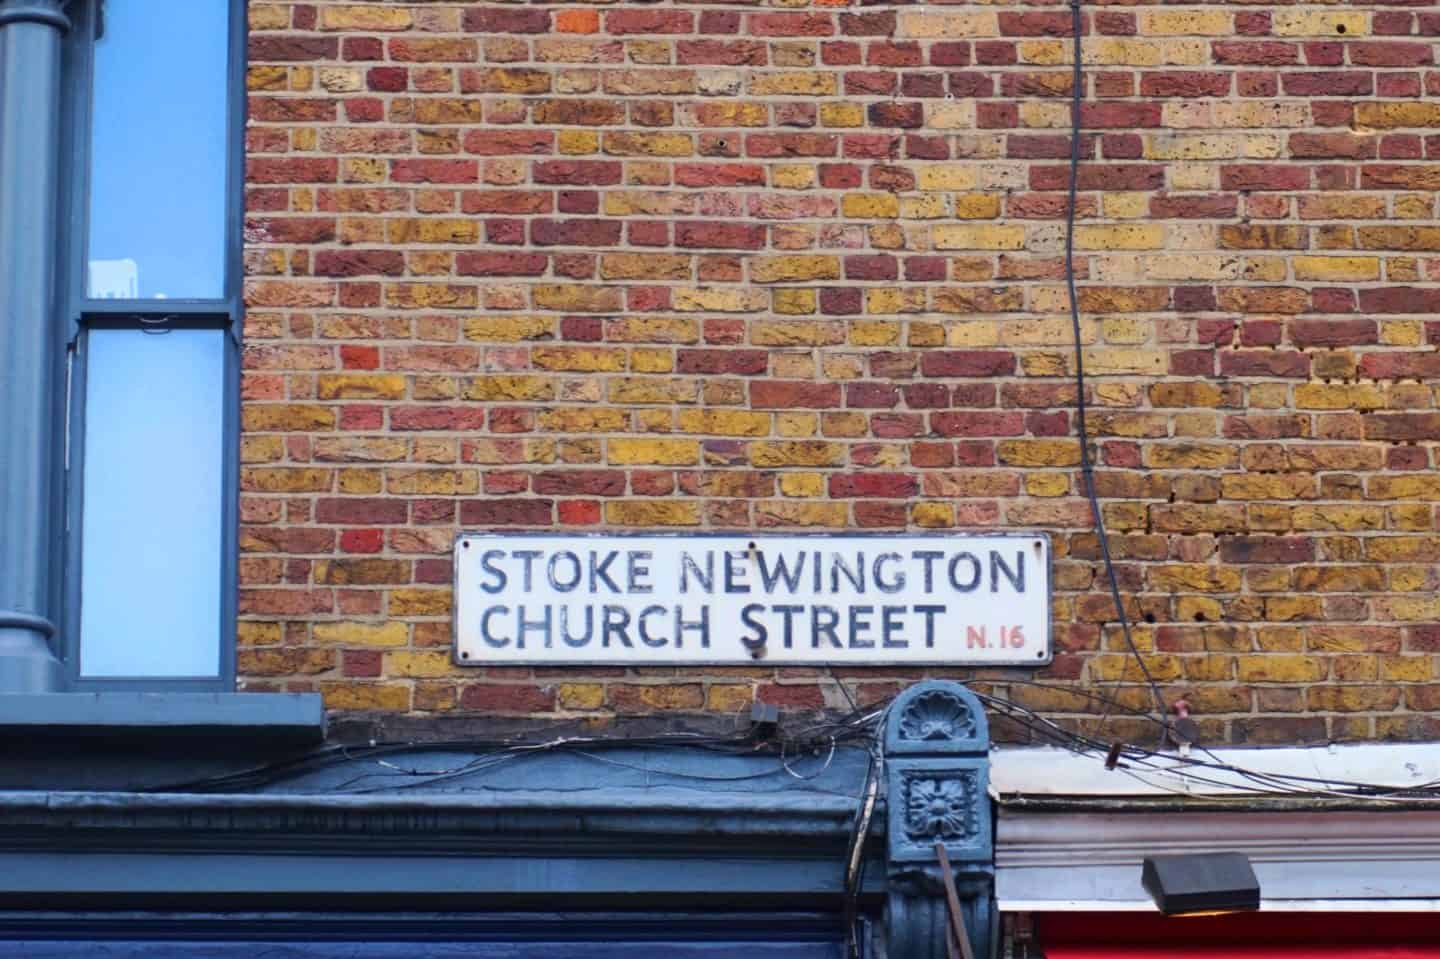 things to do in Stoke Newington